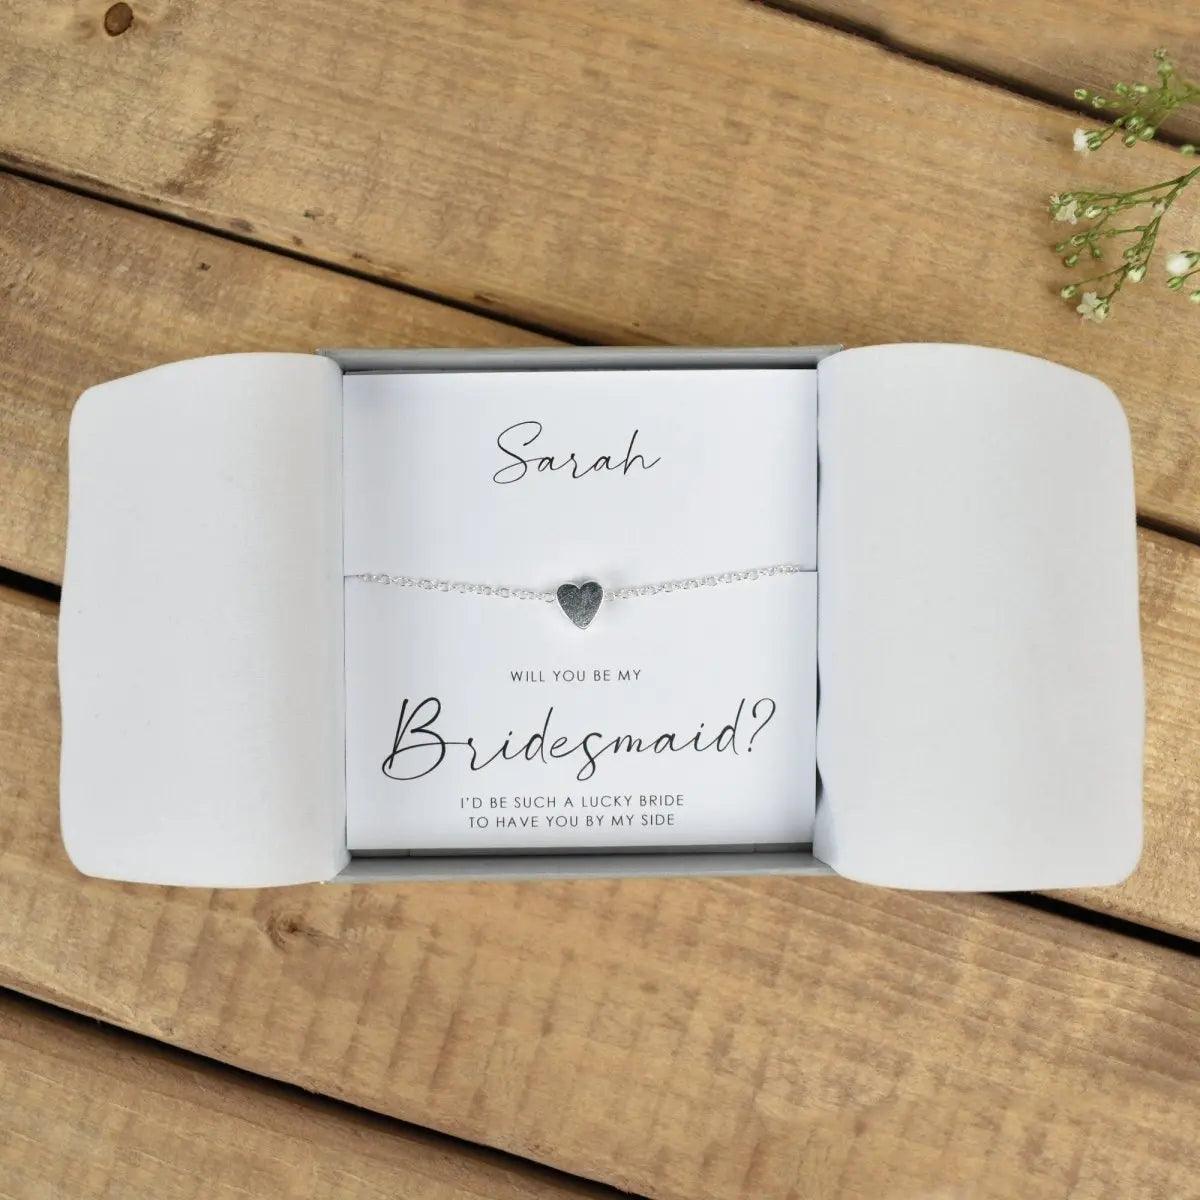 Personalised Bridesmaid Necklace, Will You Be My Bridesmaid, Bridesmaid Proposal Gift, Necklace Gift, Bridesmaid Favour, Maid of Honour Gift